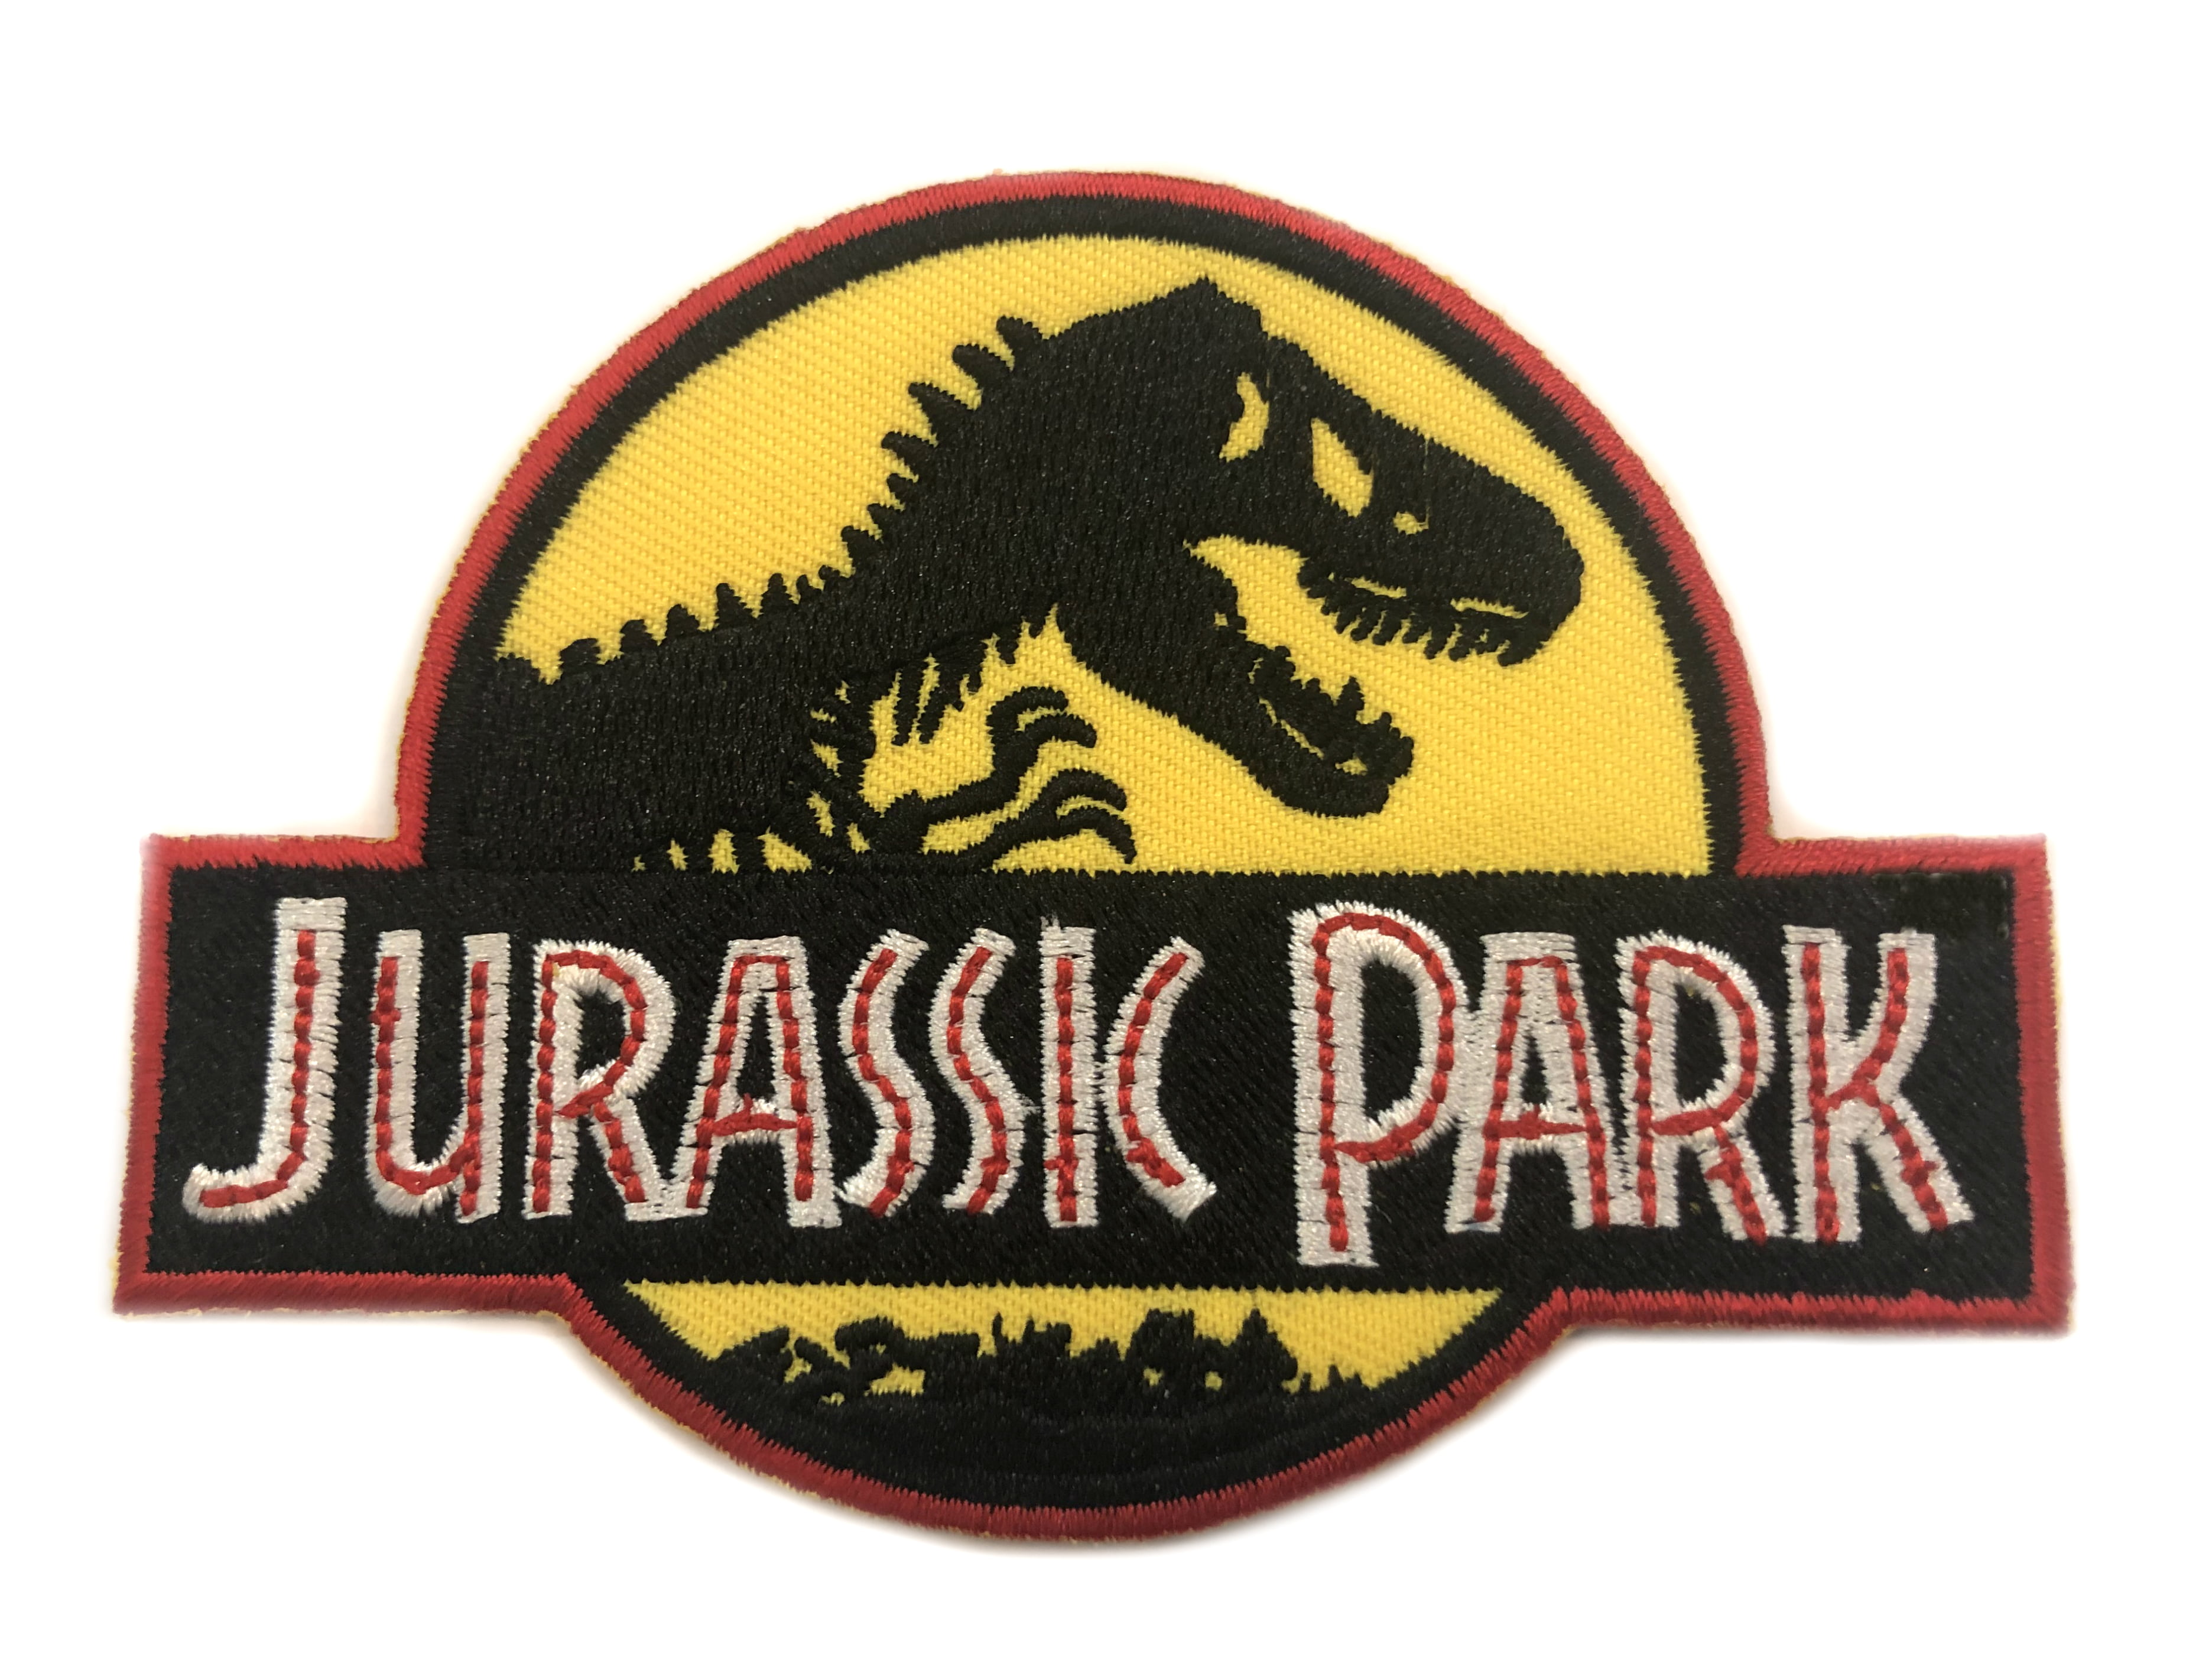 JURASSIC PARK MOVIE LOGO EMBROIDERED IRON-ON SEW-ON PATCH EMBLEM BADGE 